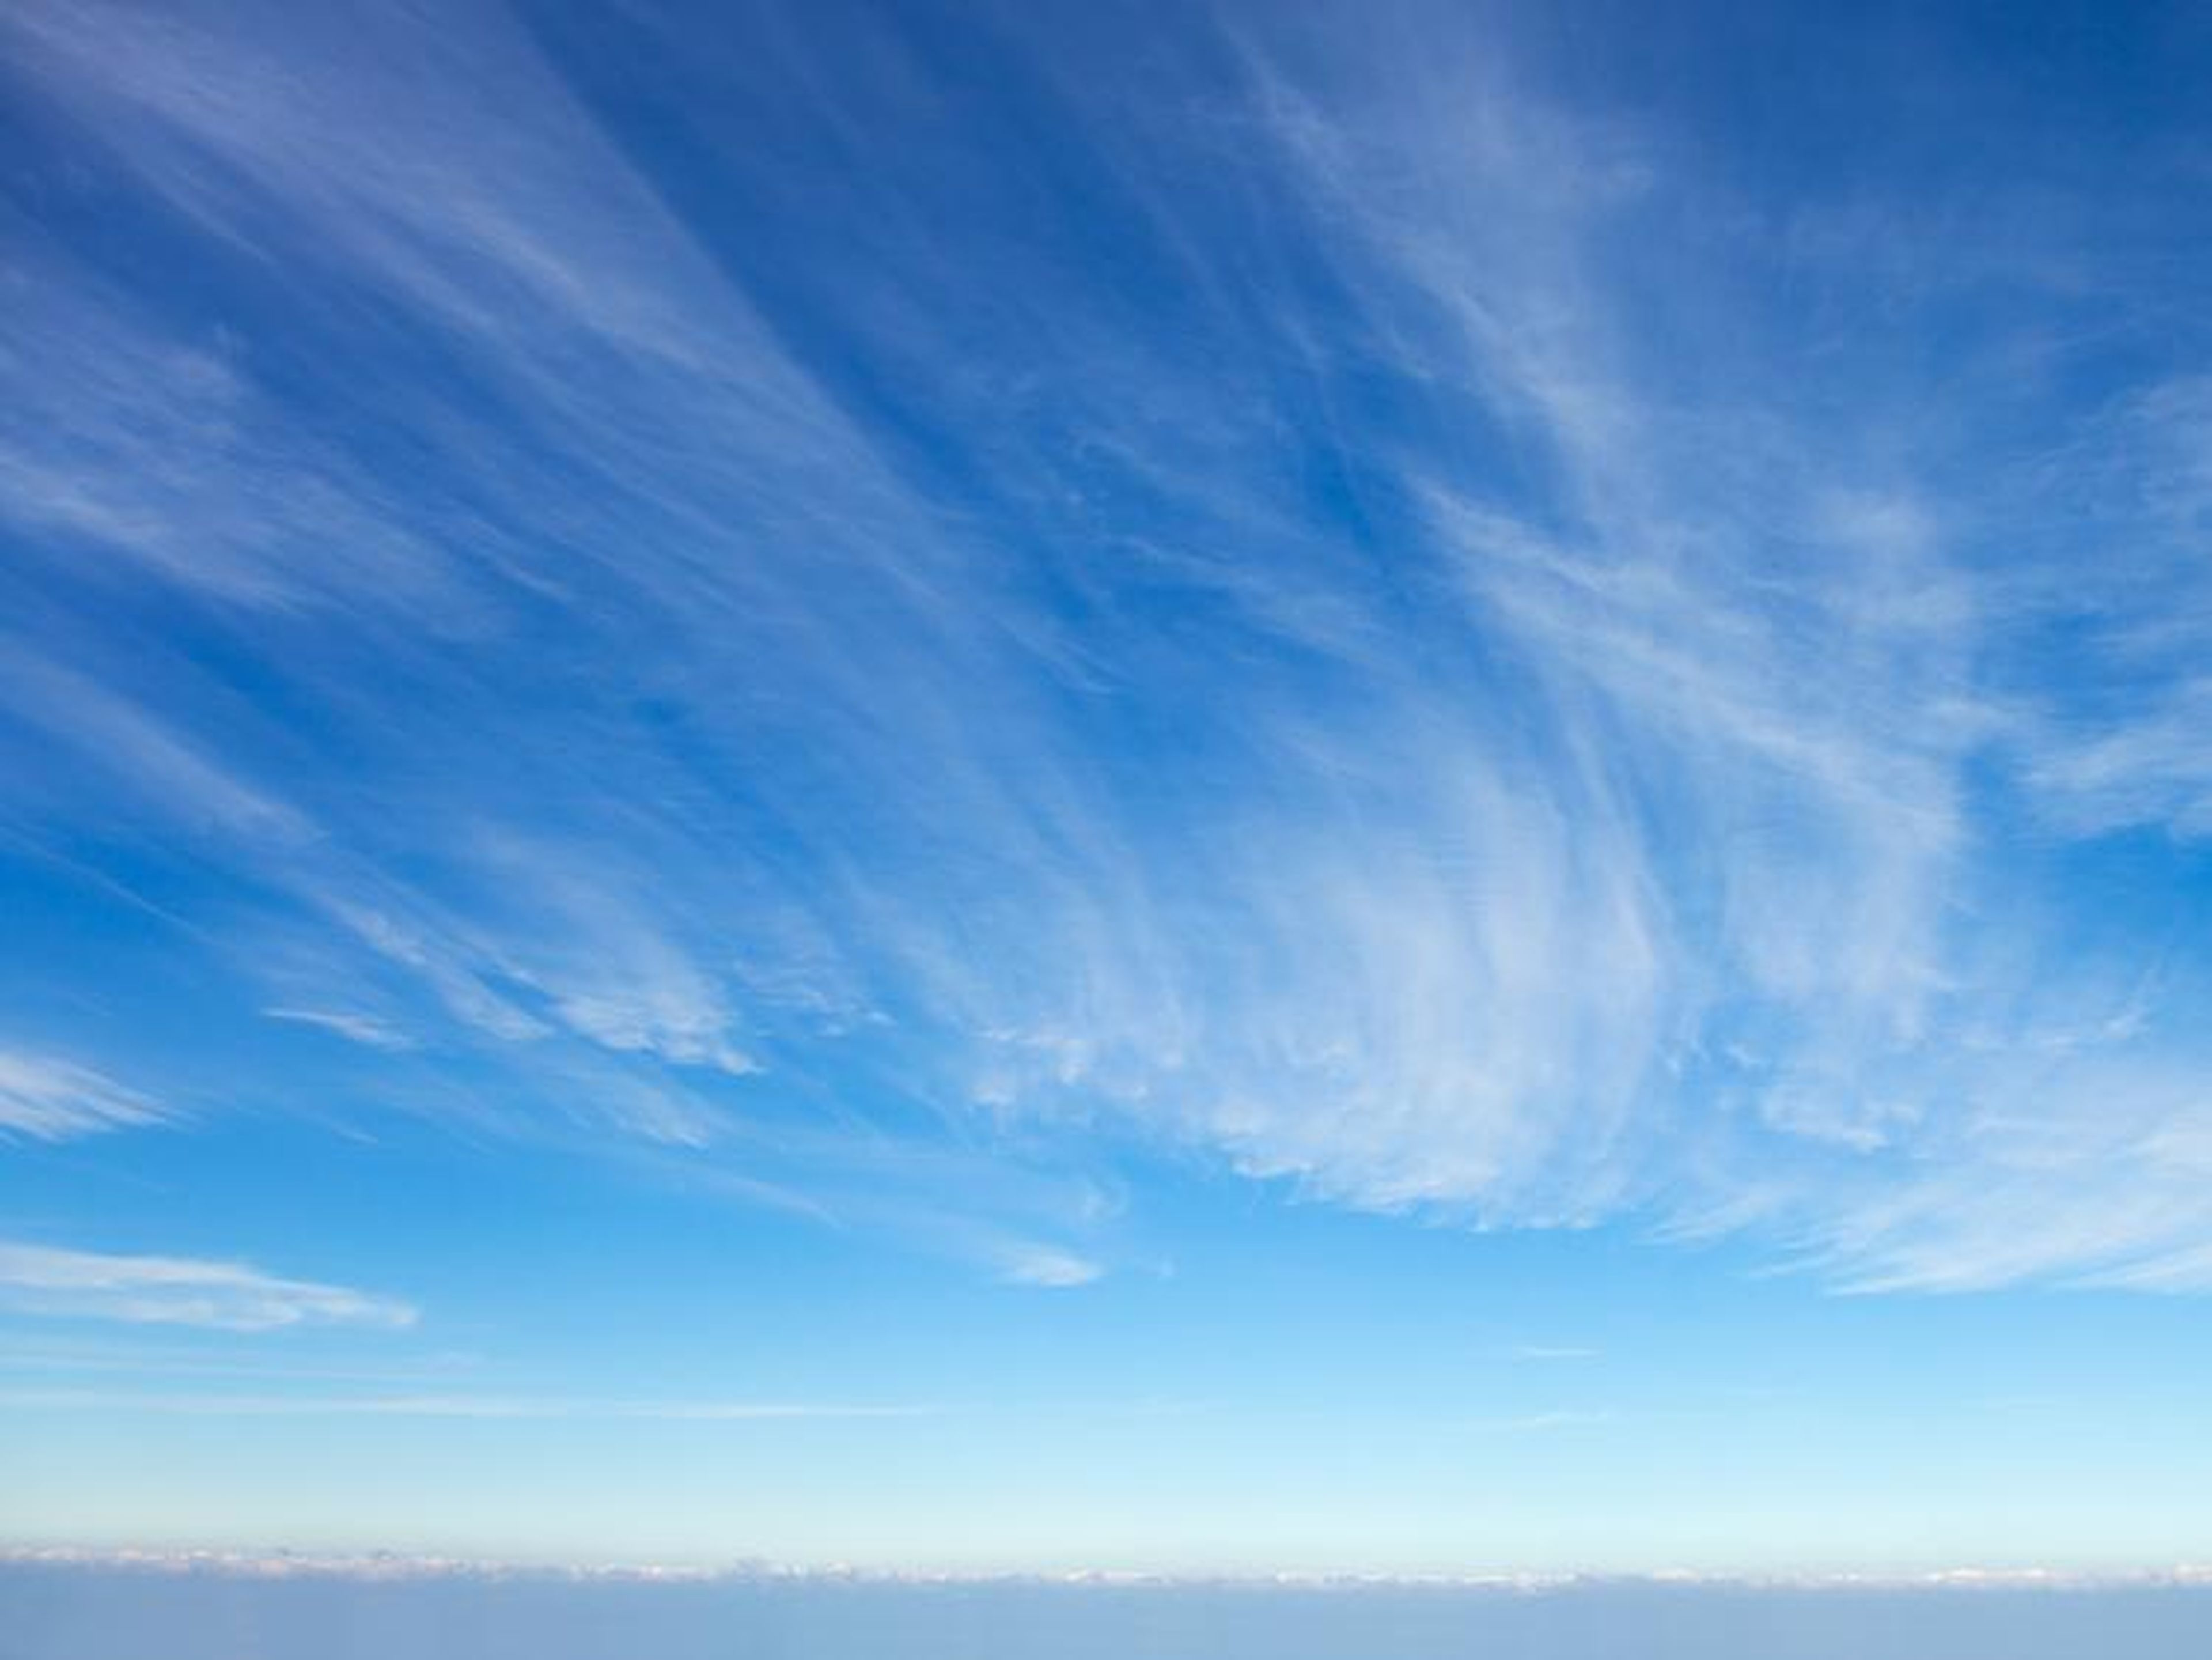 Eliminating or thinning some cirrus clouds —a type of cloud that sits high in the atmosphere and absorbs radiation — could be another way to send heat back into space.